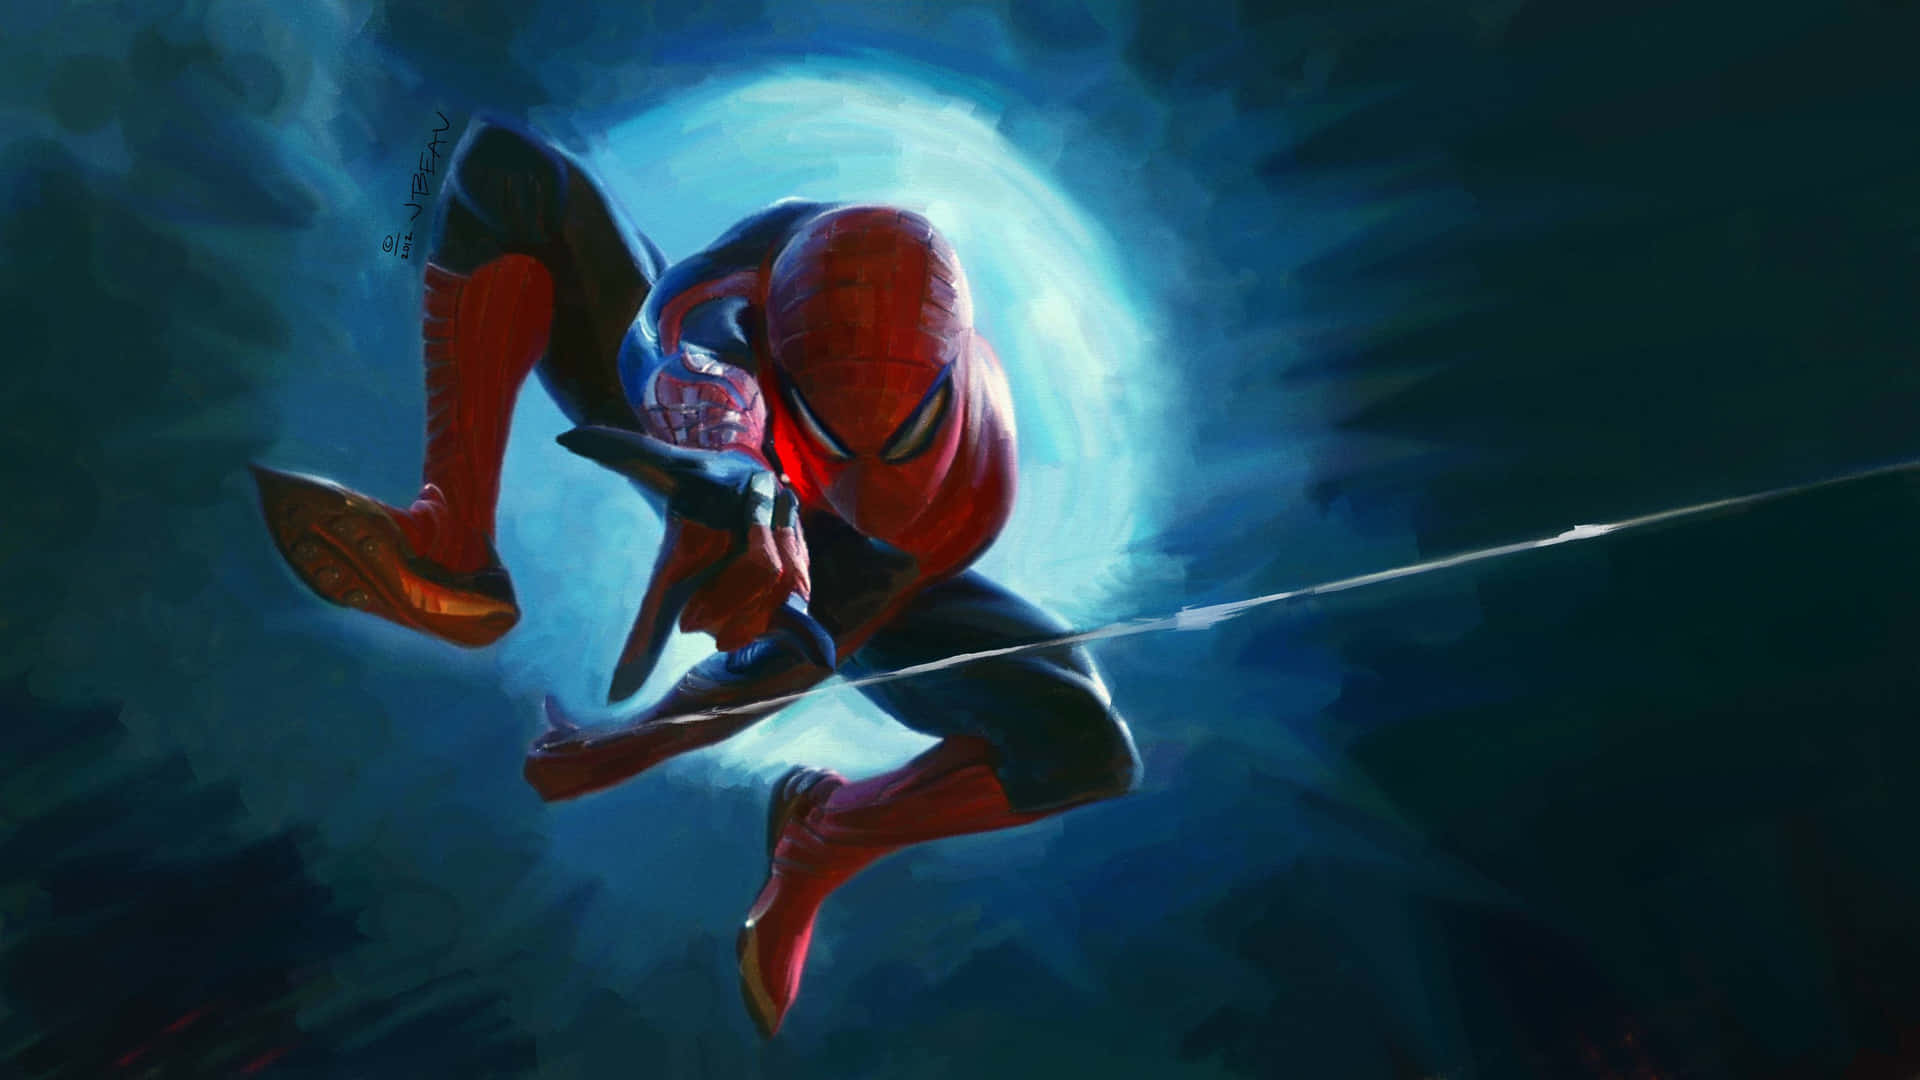 Image  Spider Man Leaping Through the Air Wallpaper